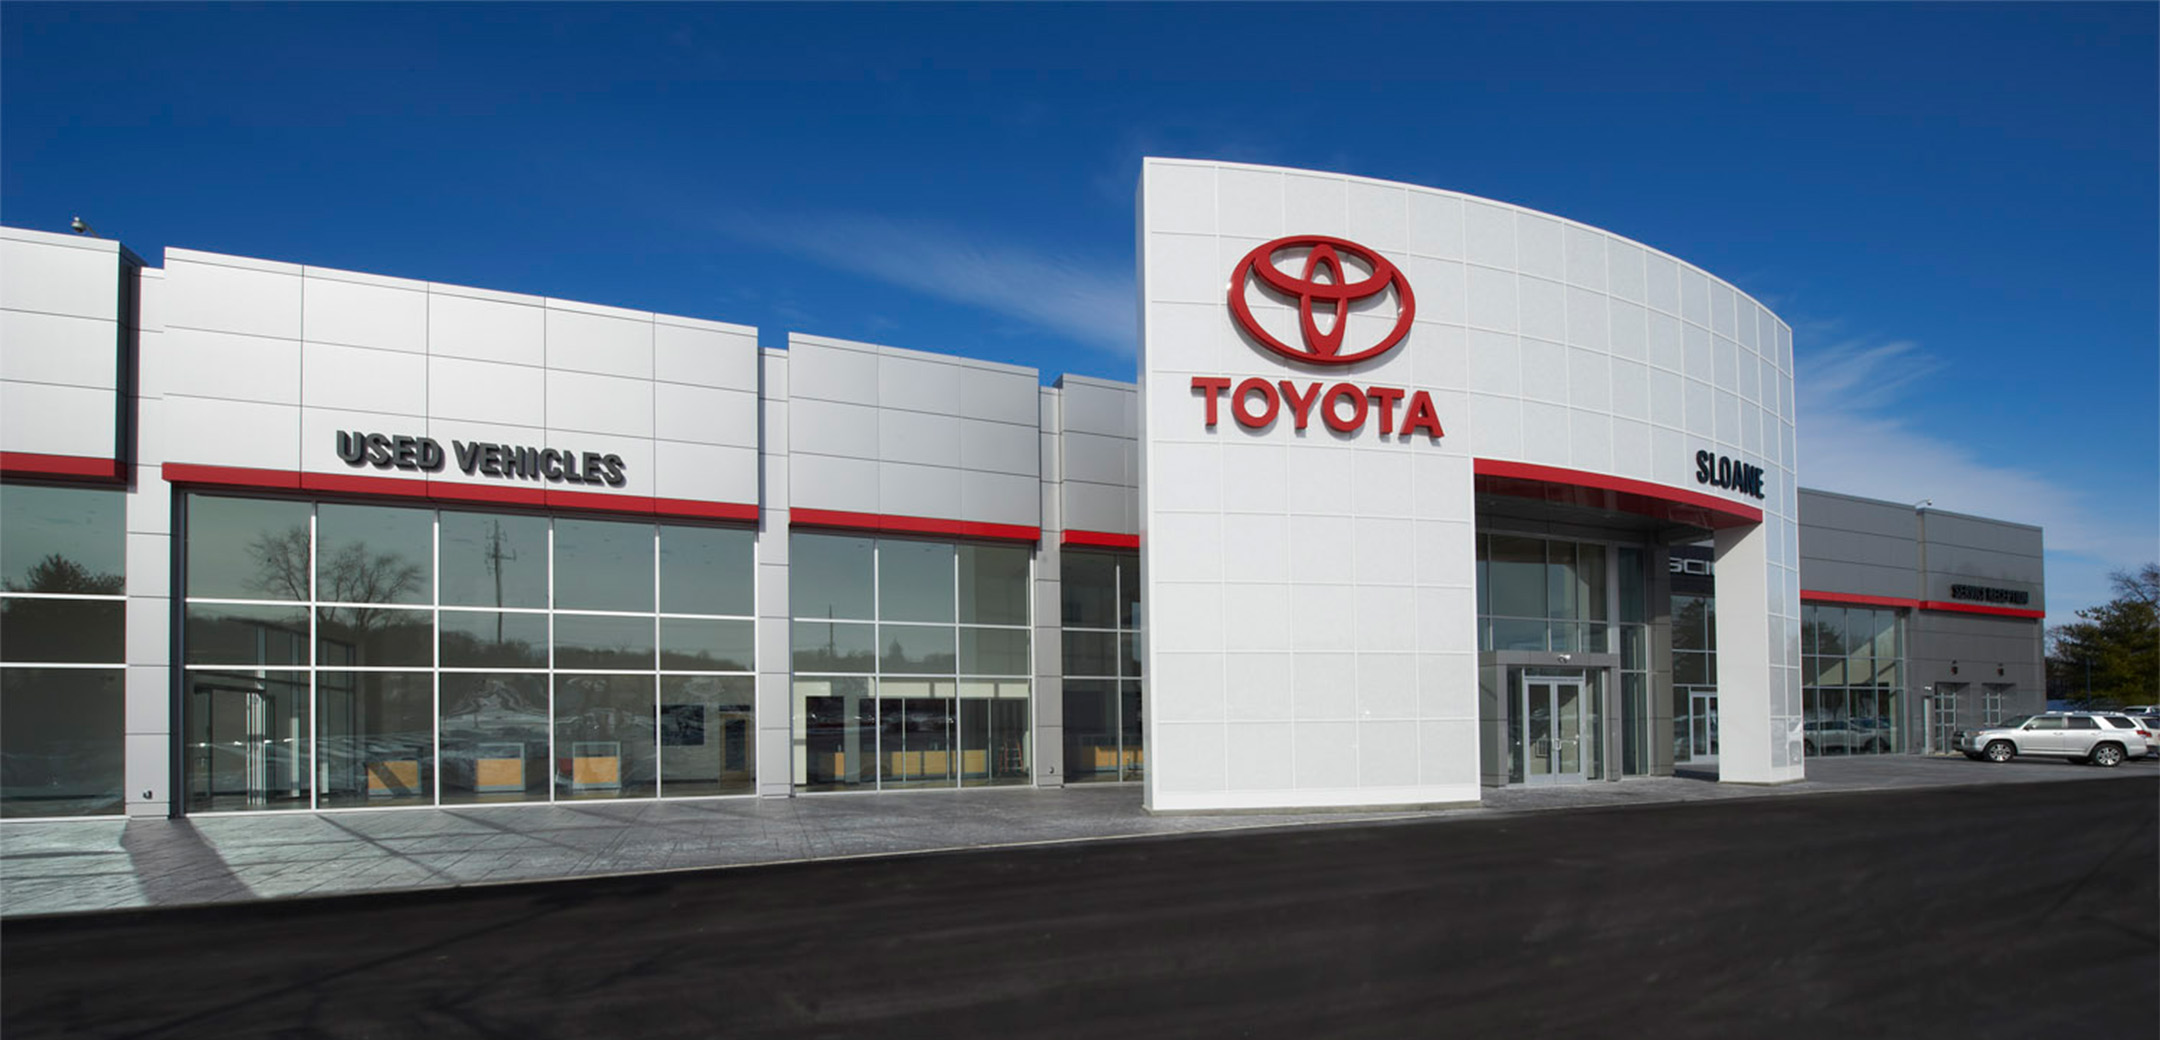 An exterior view of the Sloane modern grey panel building with the "Toyota" signage and logo on the front with large showcase windows peering inside.